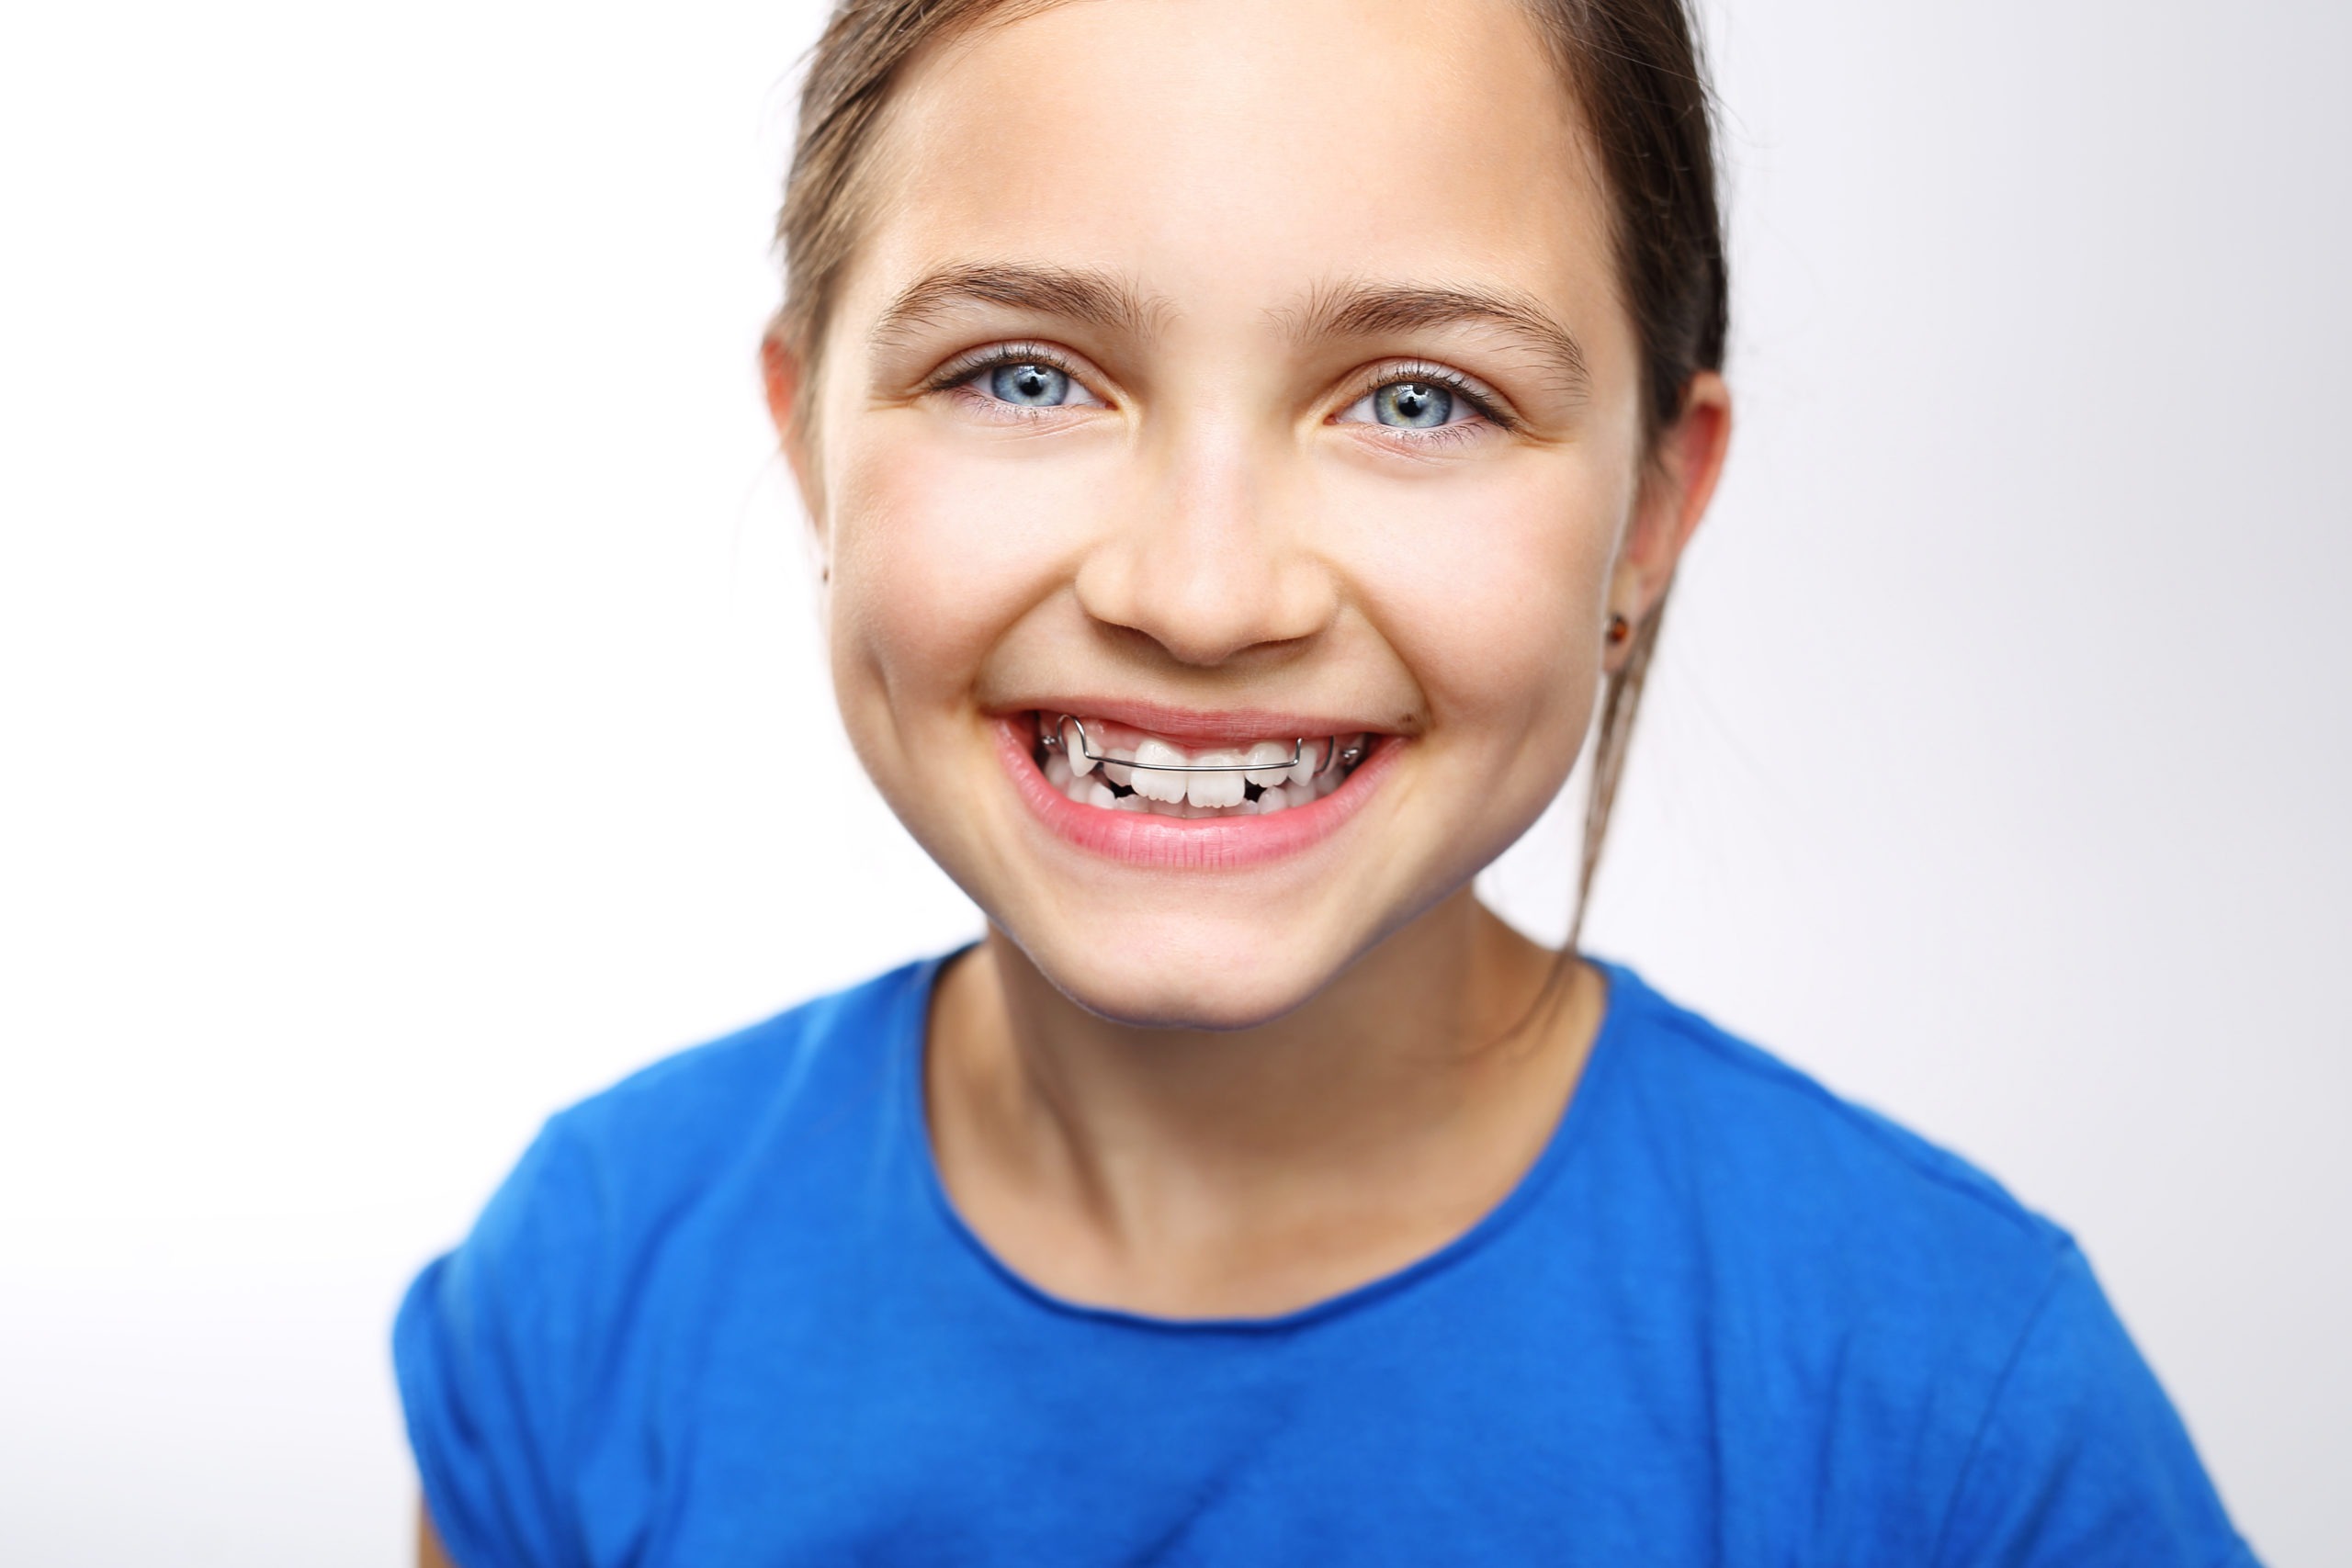 Recognizing Bad Habits That Affect Your Child’s Teeth